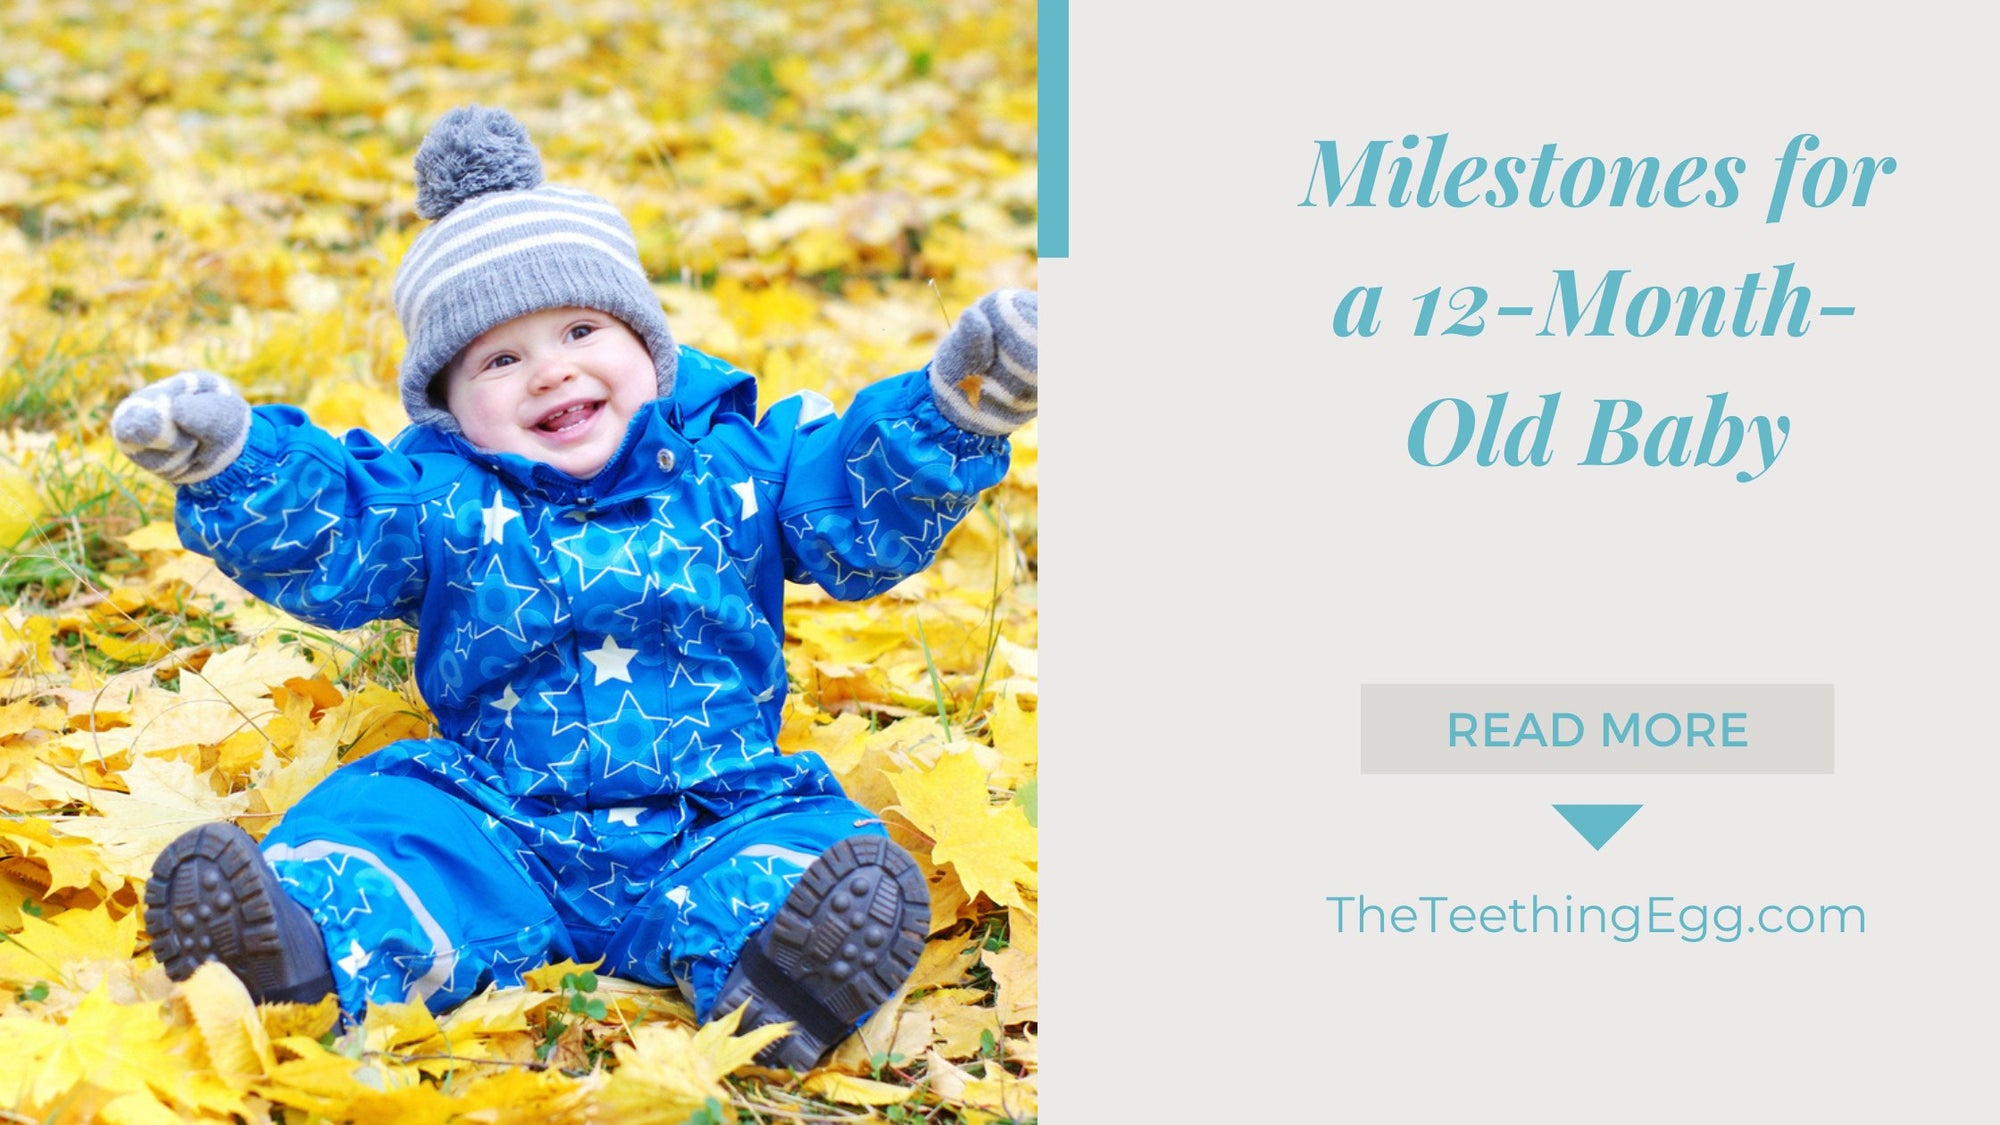 Milestones for a 12-Month-Old Baby